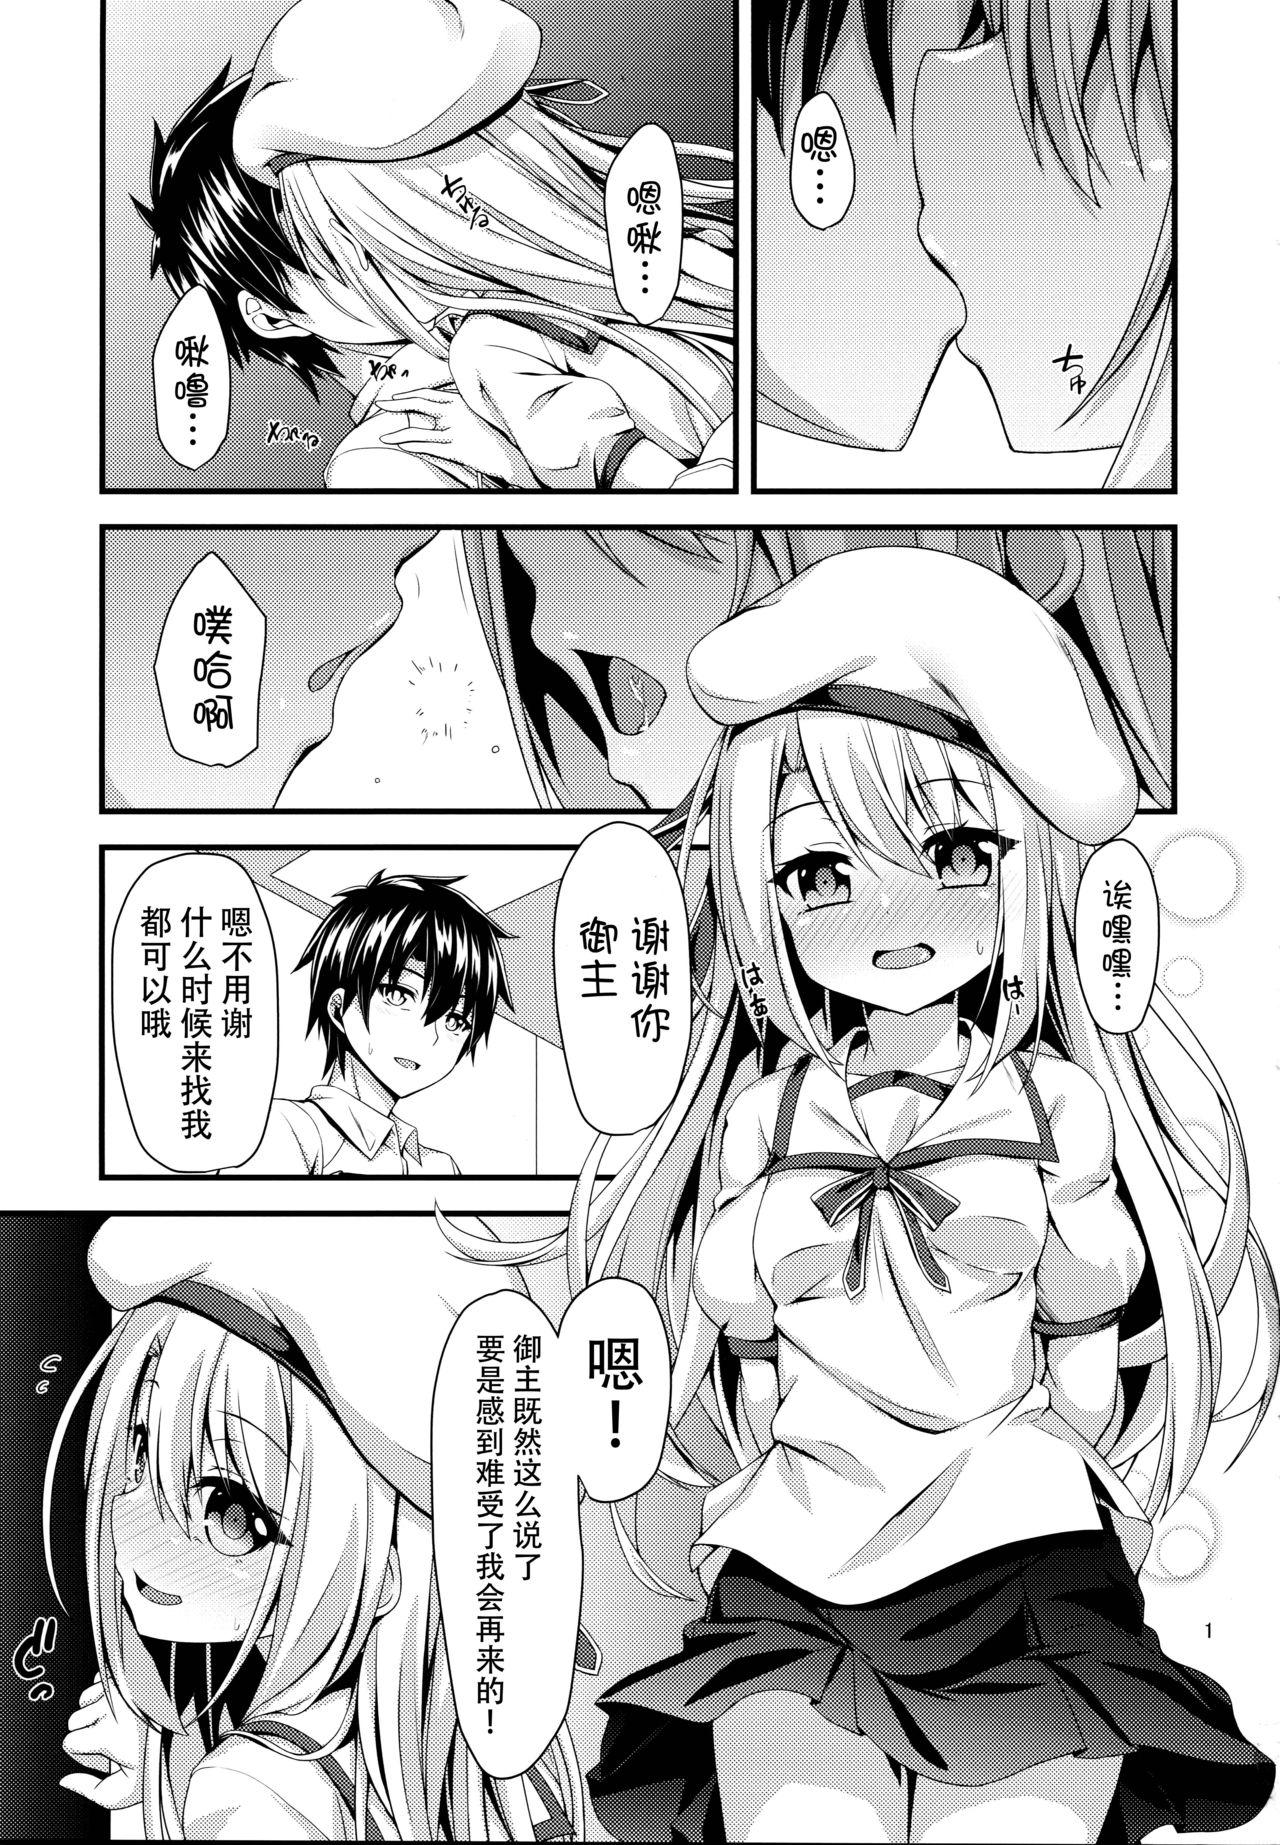 Indian Ama Love Illya - Fate grand order Fate kaleid liner prisma illya Lick - Page 3